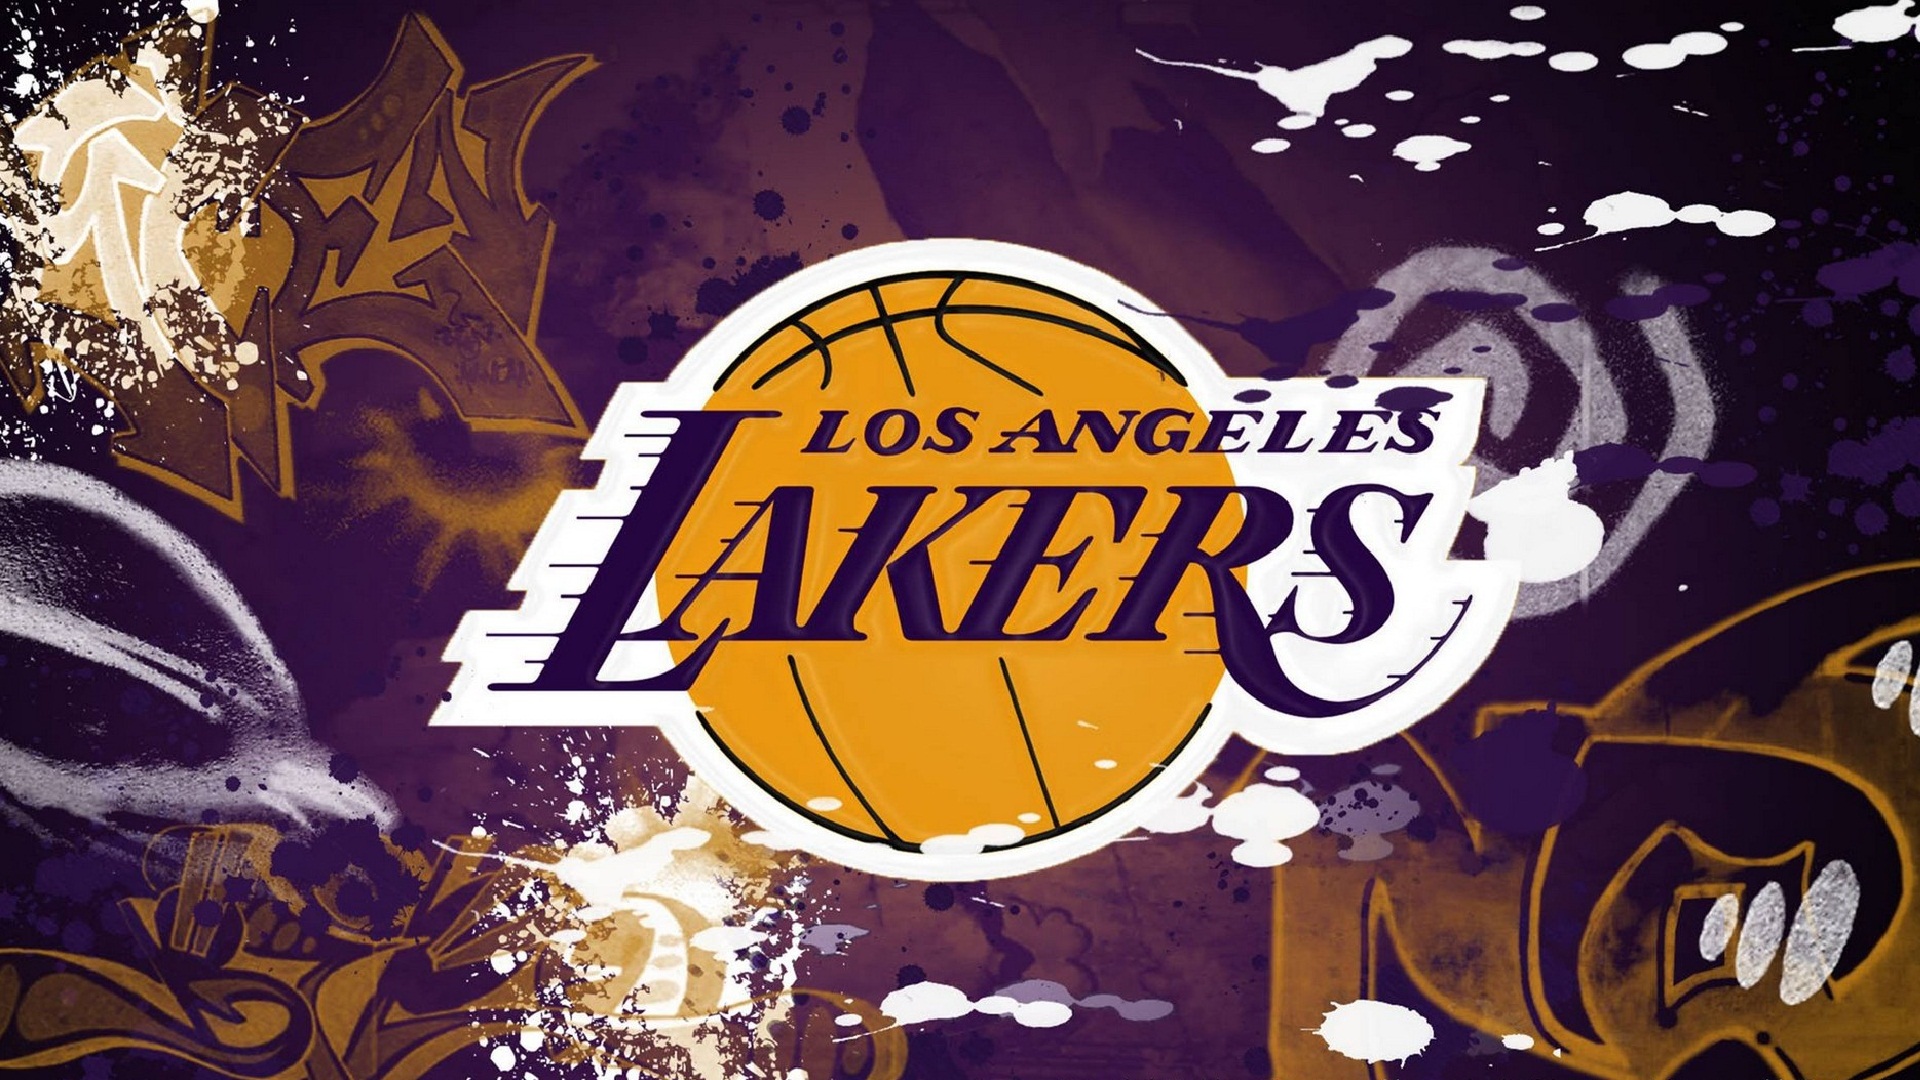 Wallpaper Desktop Los Angeles Lakers HD with image dimensions 1920x1080 pixel. You can make this wallpaper for your Desktop Computer Backgrounds, Windows or Mac Screensavers, iPhone Lock screen, Tablet or Android and another Mobile Phone device